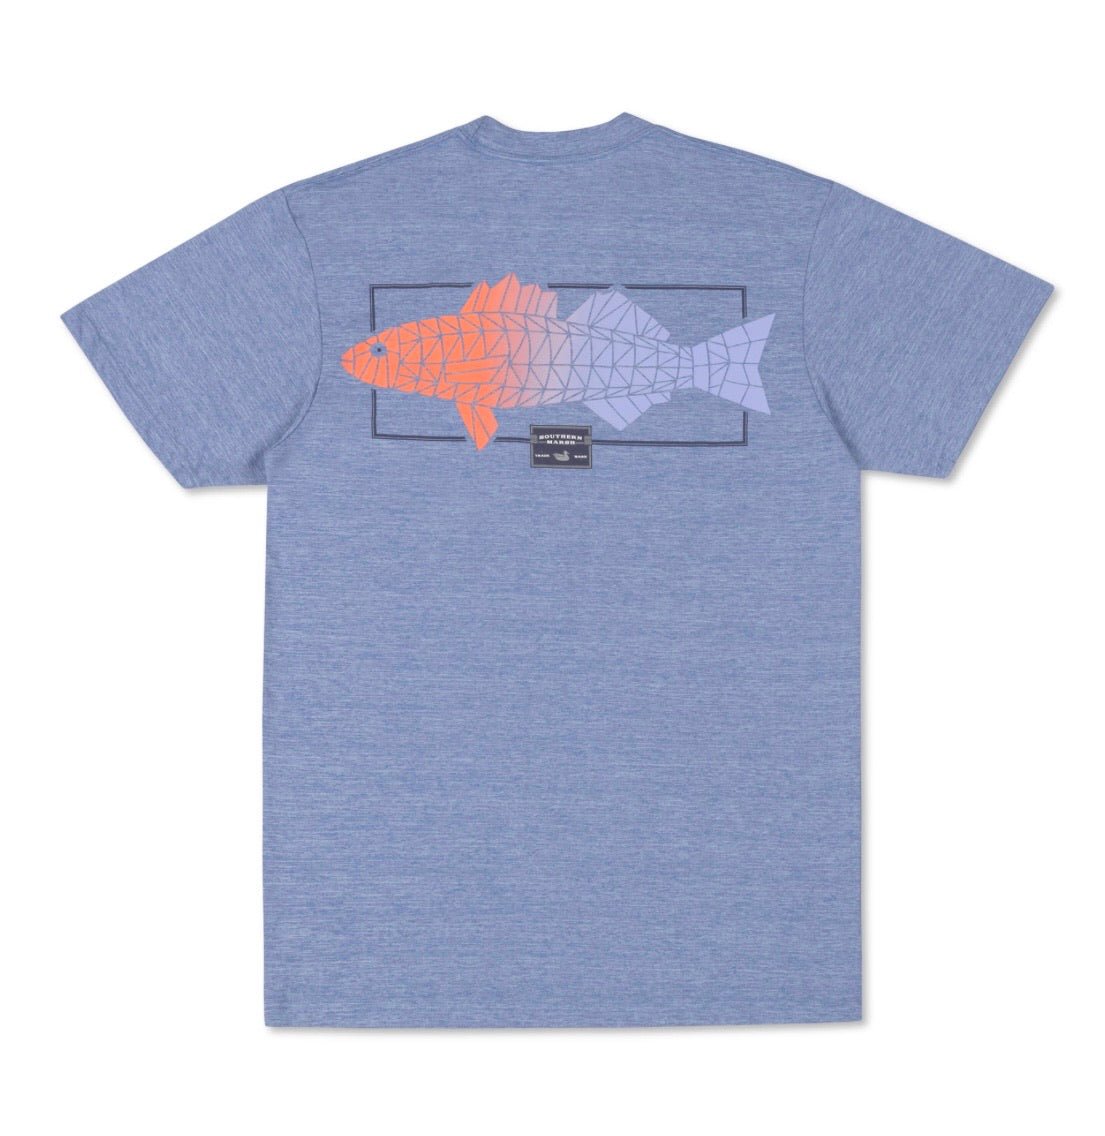 Southern Marsh FieldTec Heathered Tee - Gradient - Oxford Blue - Jimberly's Boutique